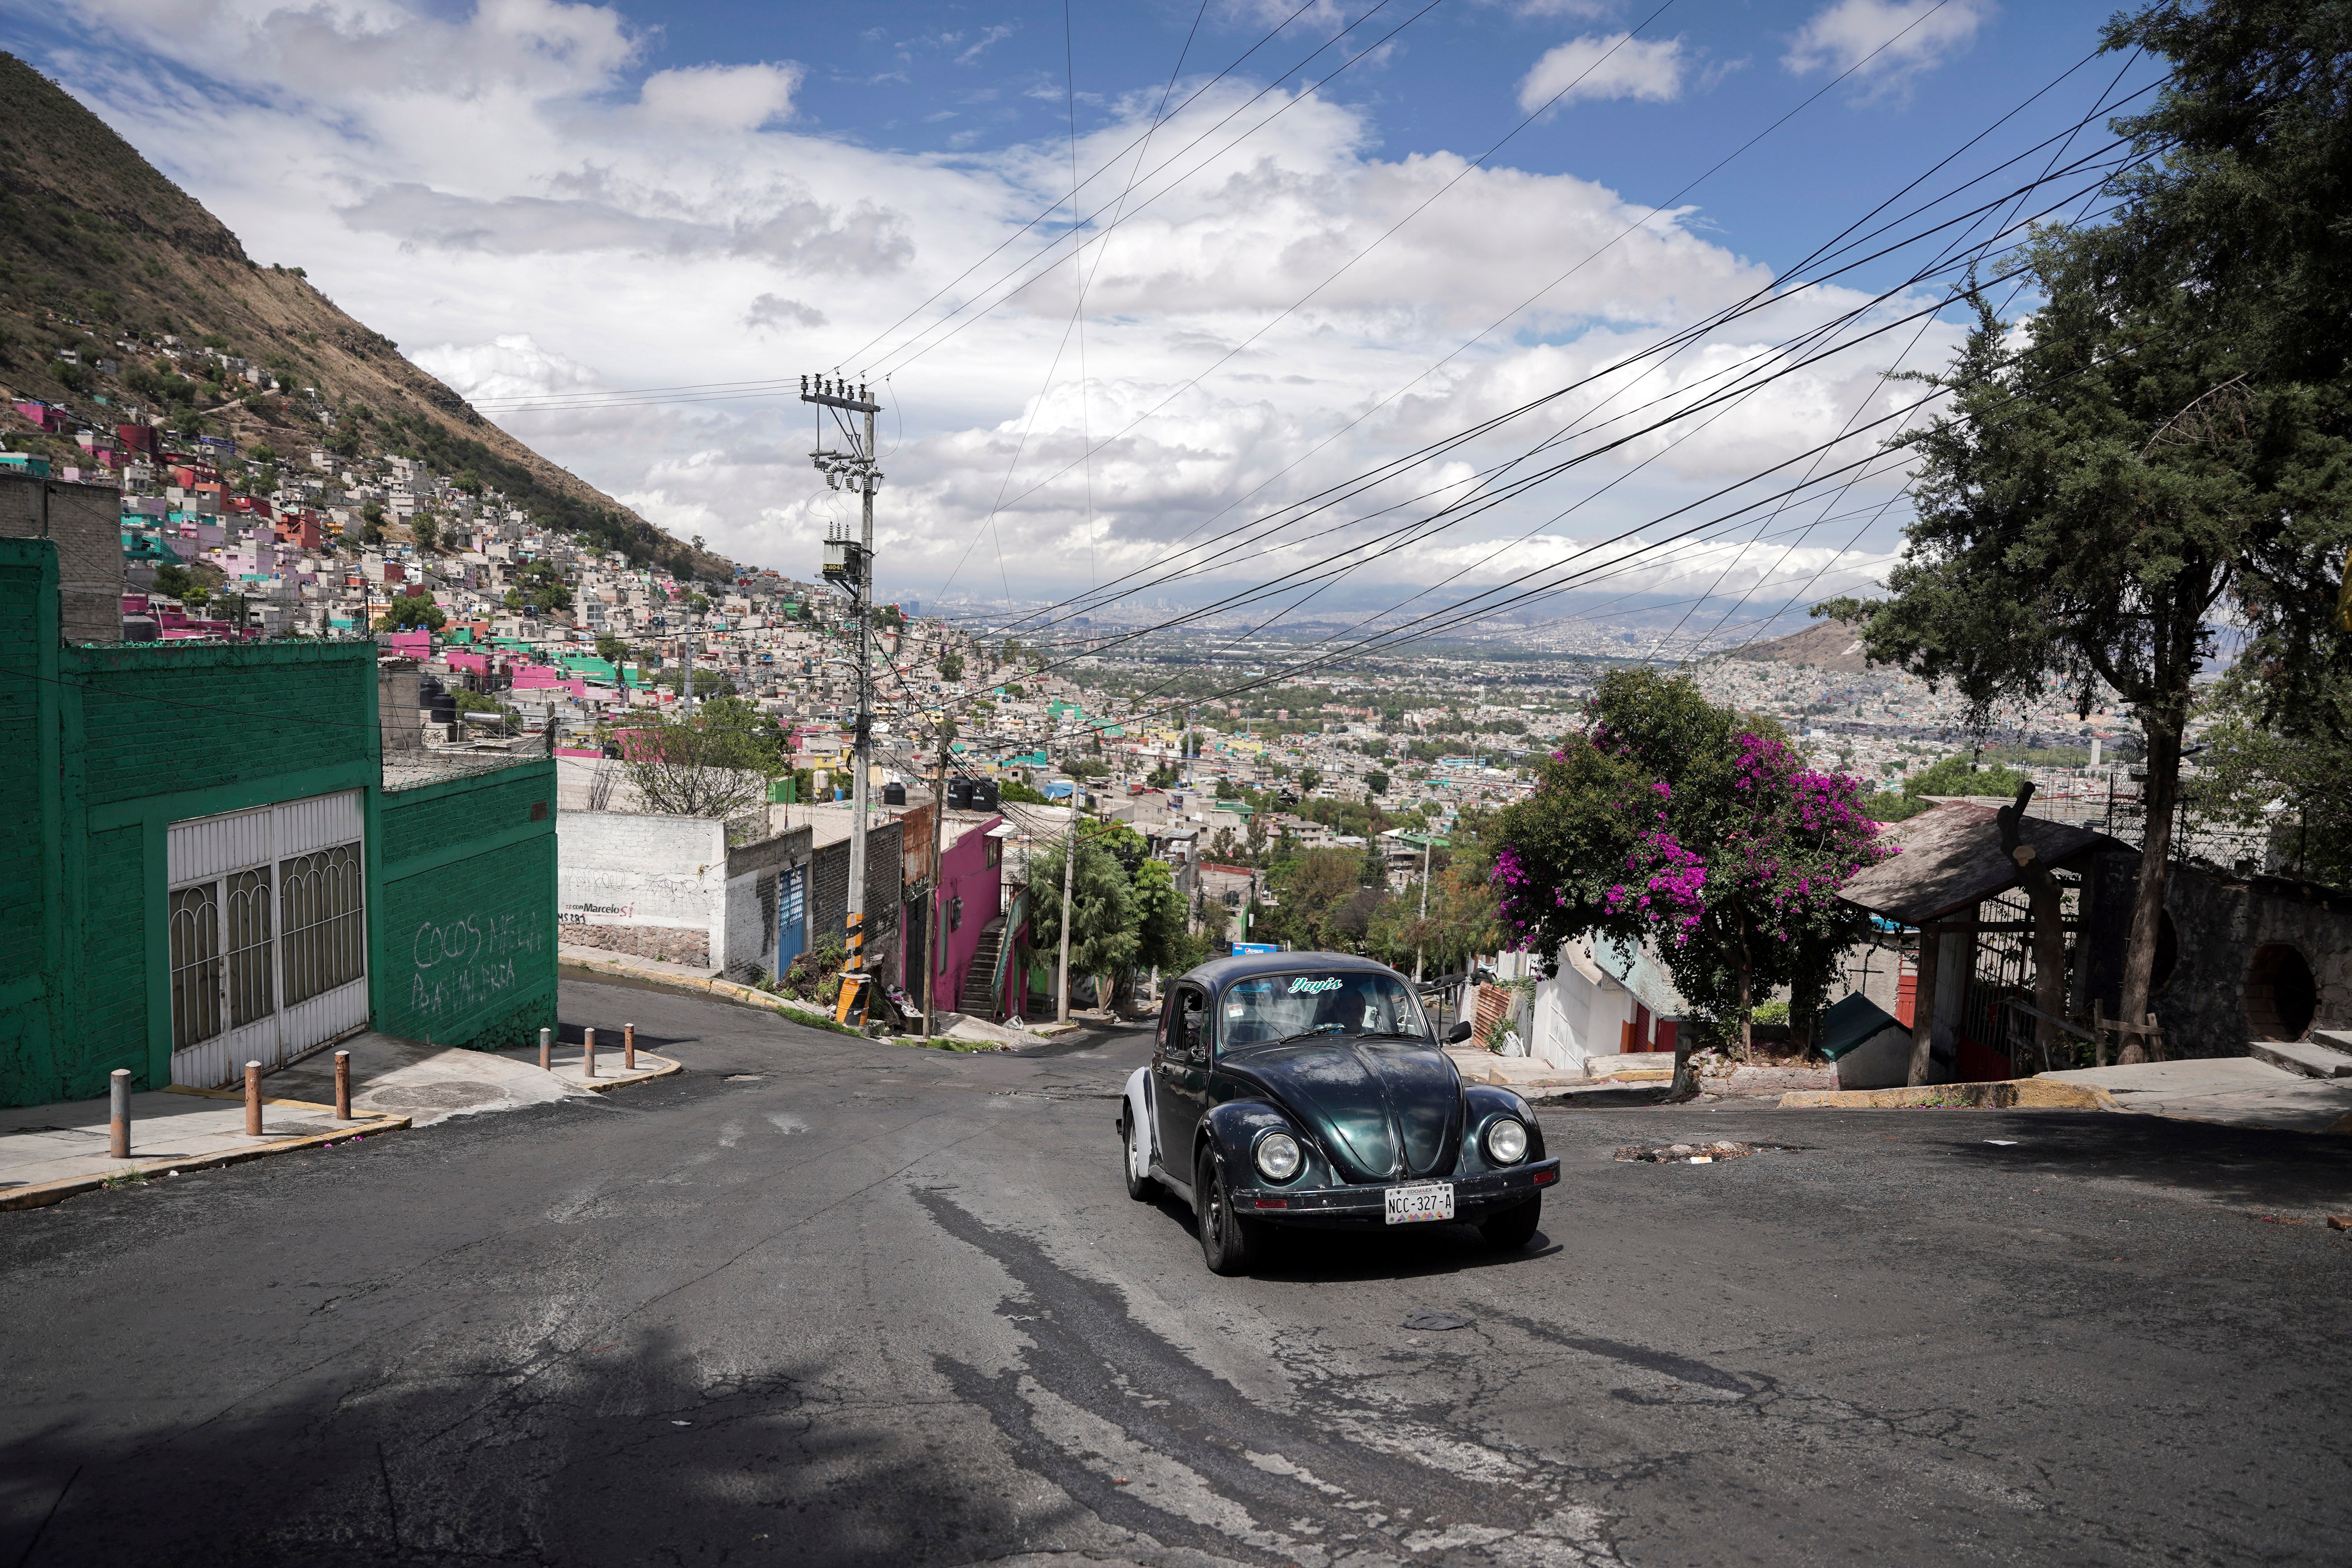 Janette Navarro drives her 1996 Volkswagen Beetle up a steep hill in the Cuautepec neighborhood of Mexico City